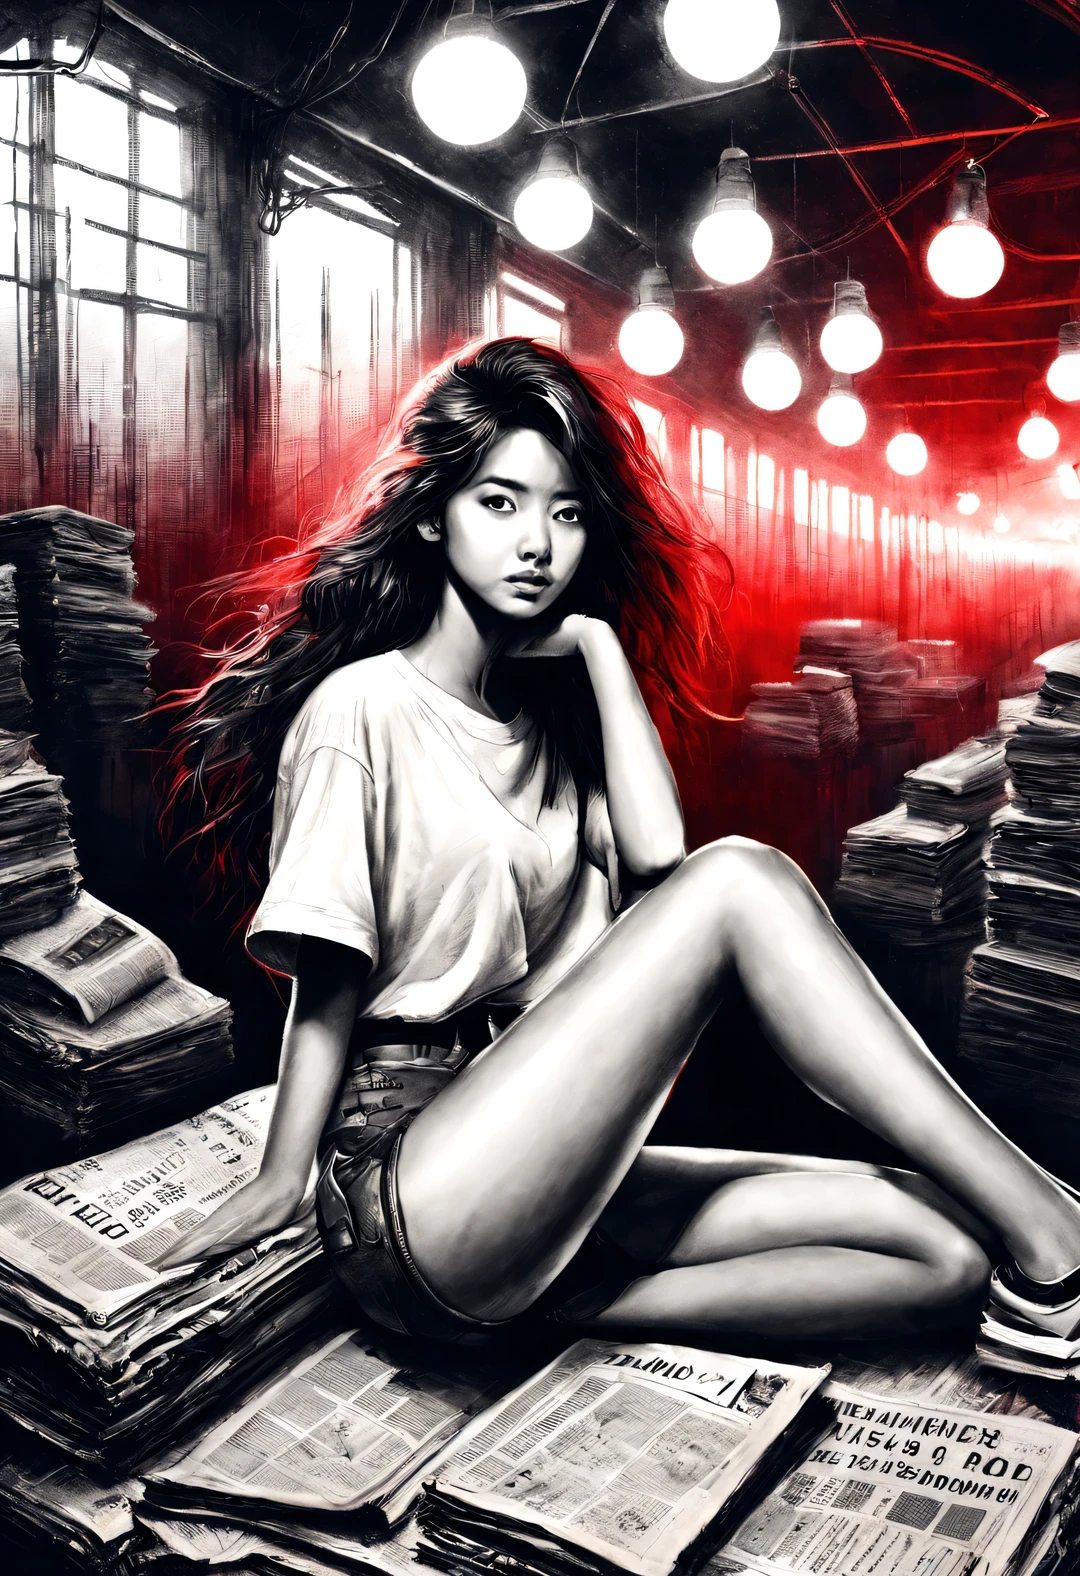 (Graphite painting), (A beautiful charming girl sits cross-legged on a mountain of old newspapers in the basement), (She is wearing a white crew neck shirt and jeans), A young and wild Asian face, Slightly mixed face shape, (Slightly square chin: 0.4), Messy and too long, Hard curly hair, Lazy, (perfect face), The slender eyes narrowed slightly, sports shoes, (Industrial lights on the roof emit a dim, weak red light: 1.34),
background: The basement is covered with many old newspapers and dilapidated walls, industrial style, retro shabby,
90's anime style, Bold silhouettes, Graphic arts, line art, black and white, line art with pen pressure, Pen pressure sketch, Calligraphy pen with pen pressure, G pen style，With pen pressure, Hand drawn thick lines, high contrast, IG model,